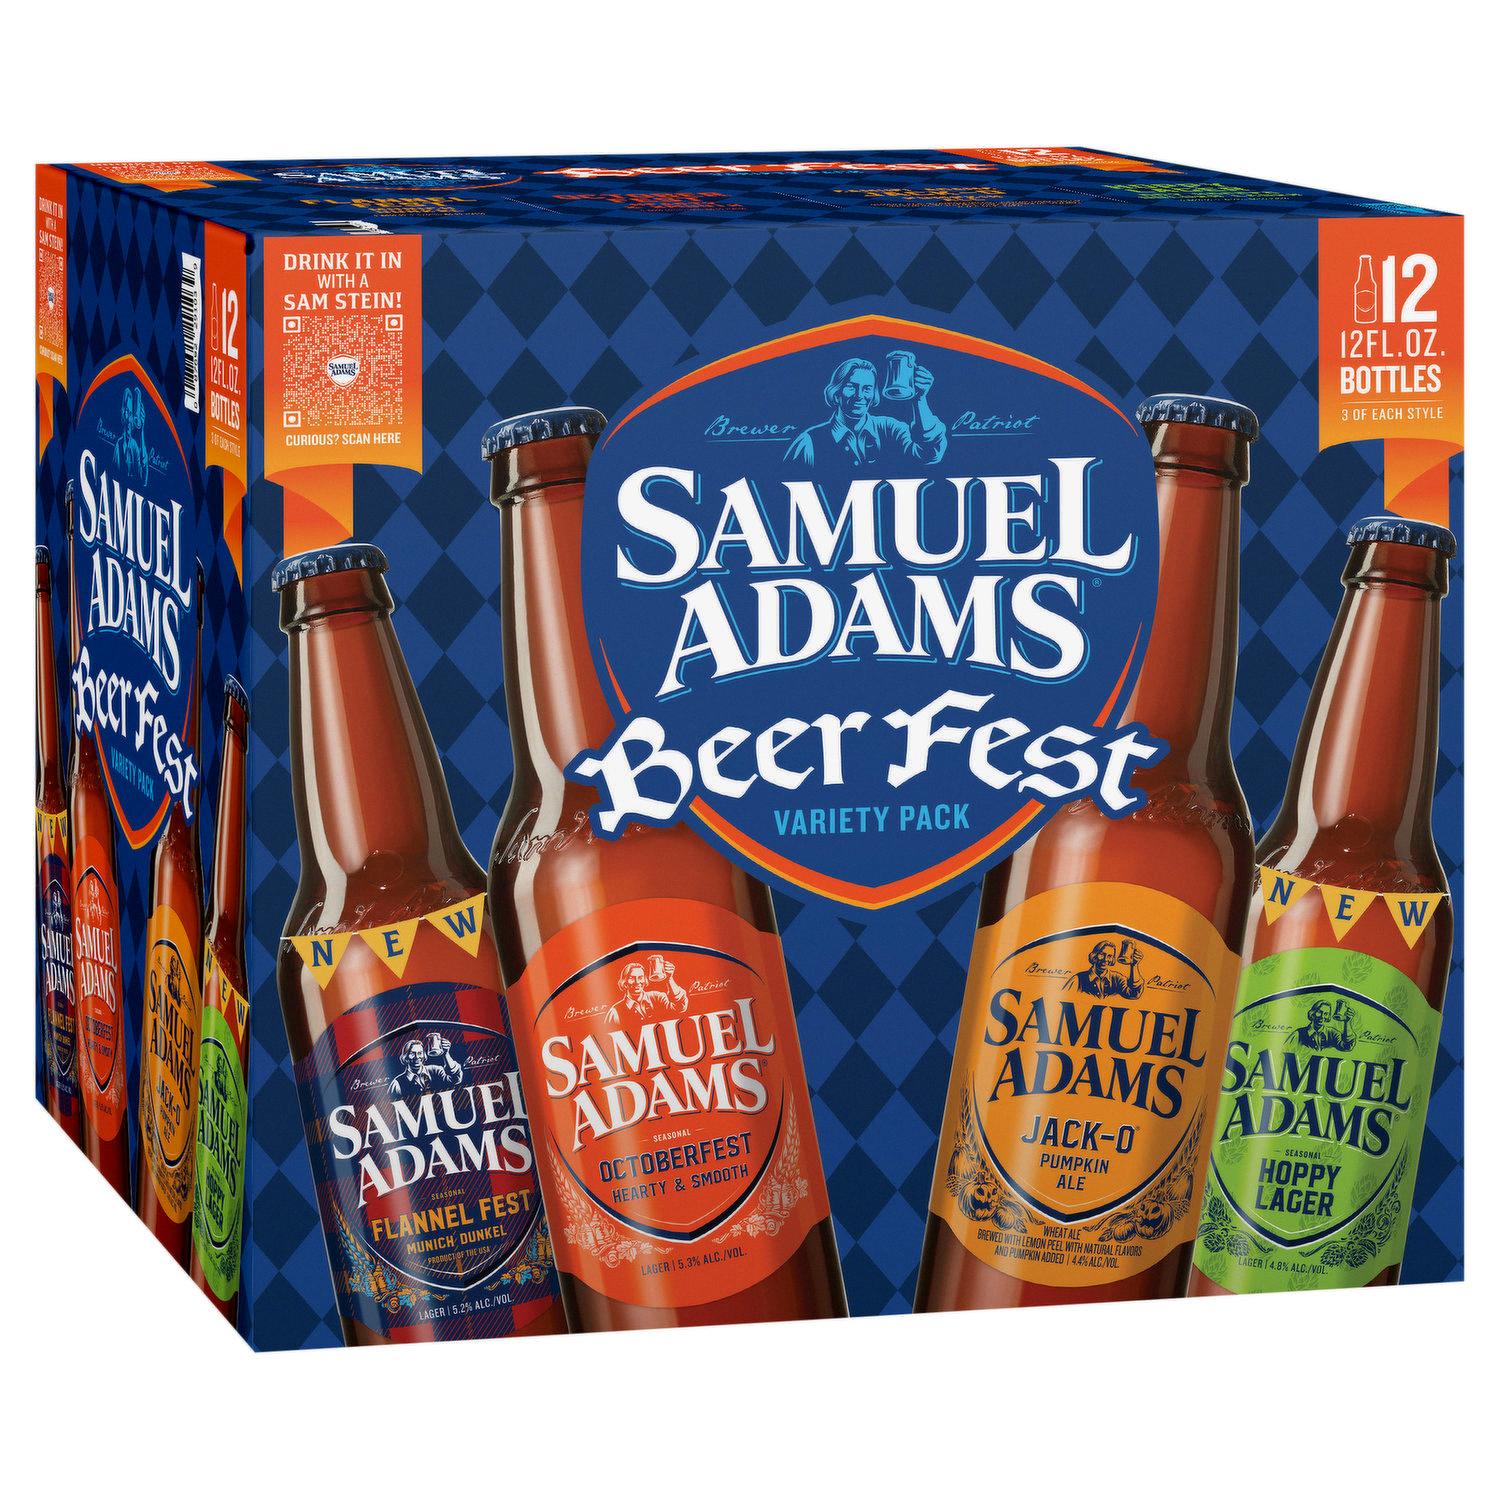 The Delicious Flavors of Samuel Adams Fall Variety Pack